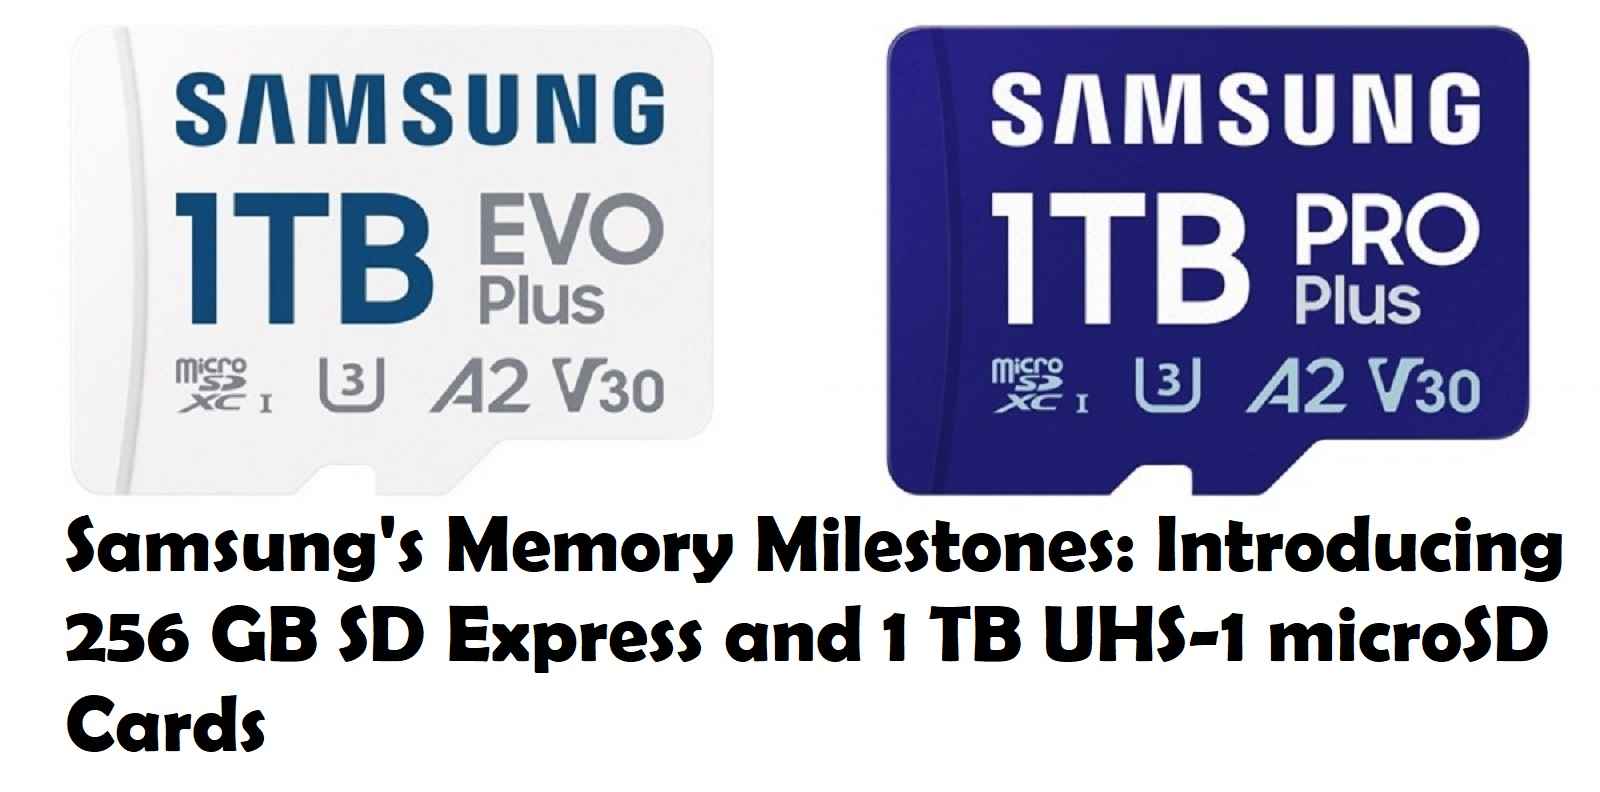 Samsung's Memory 256GB SD Express and 1 TB UHS-1 microSD